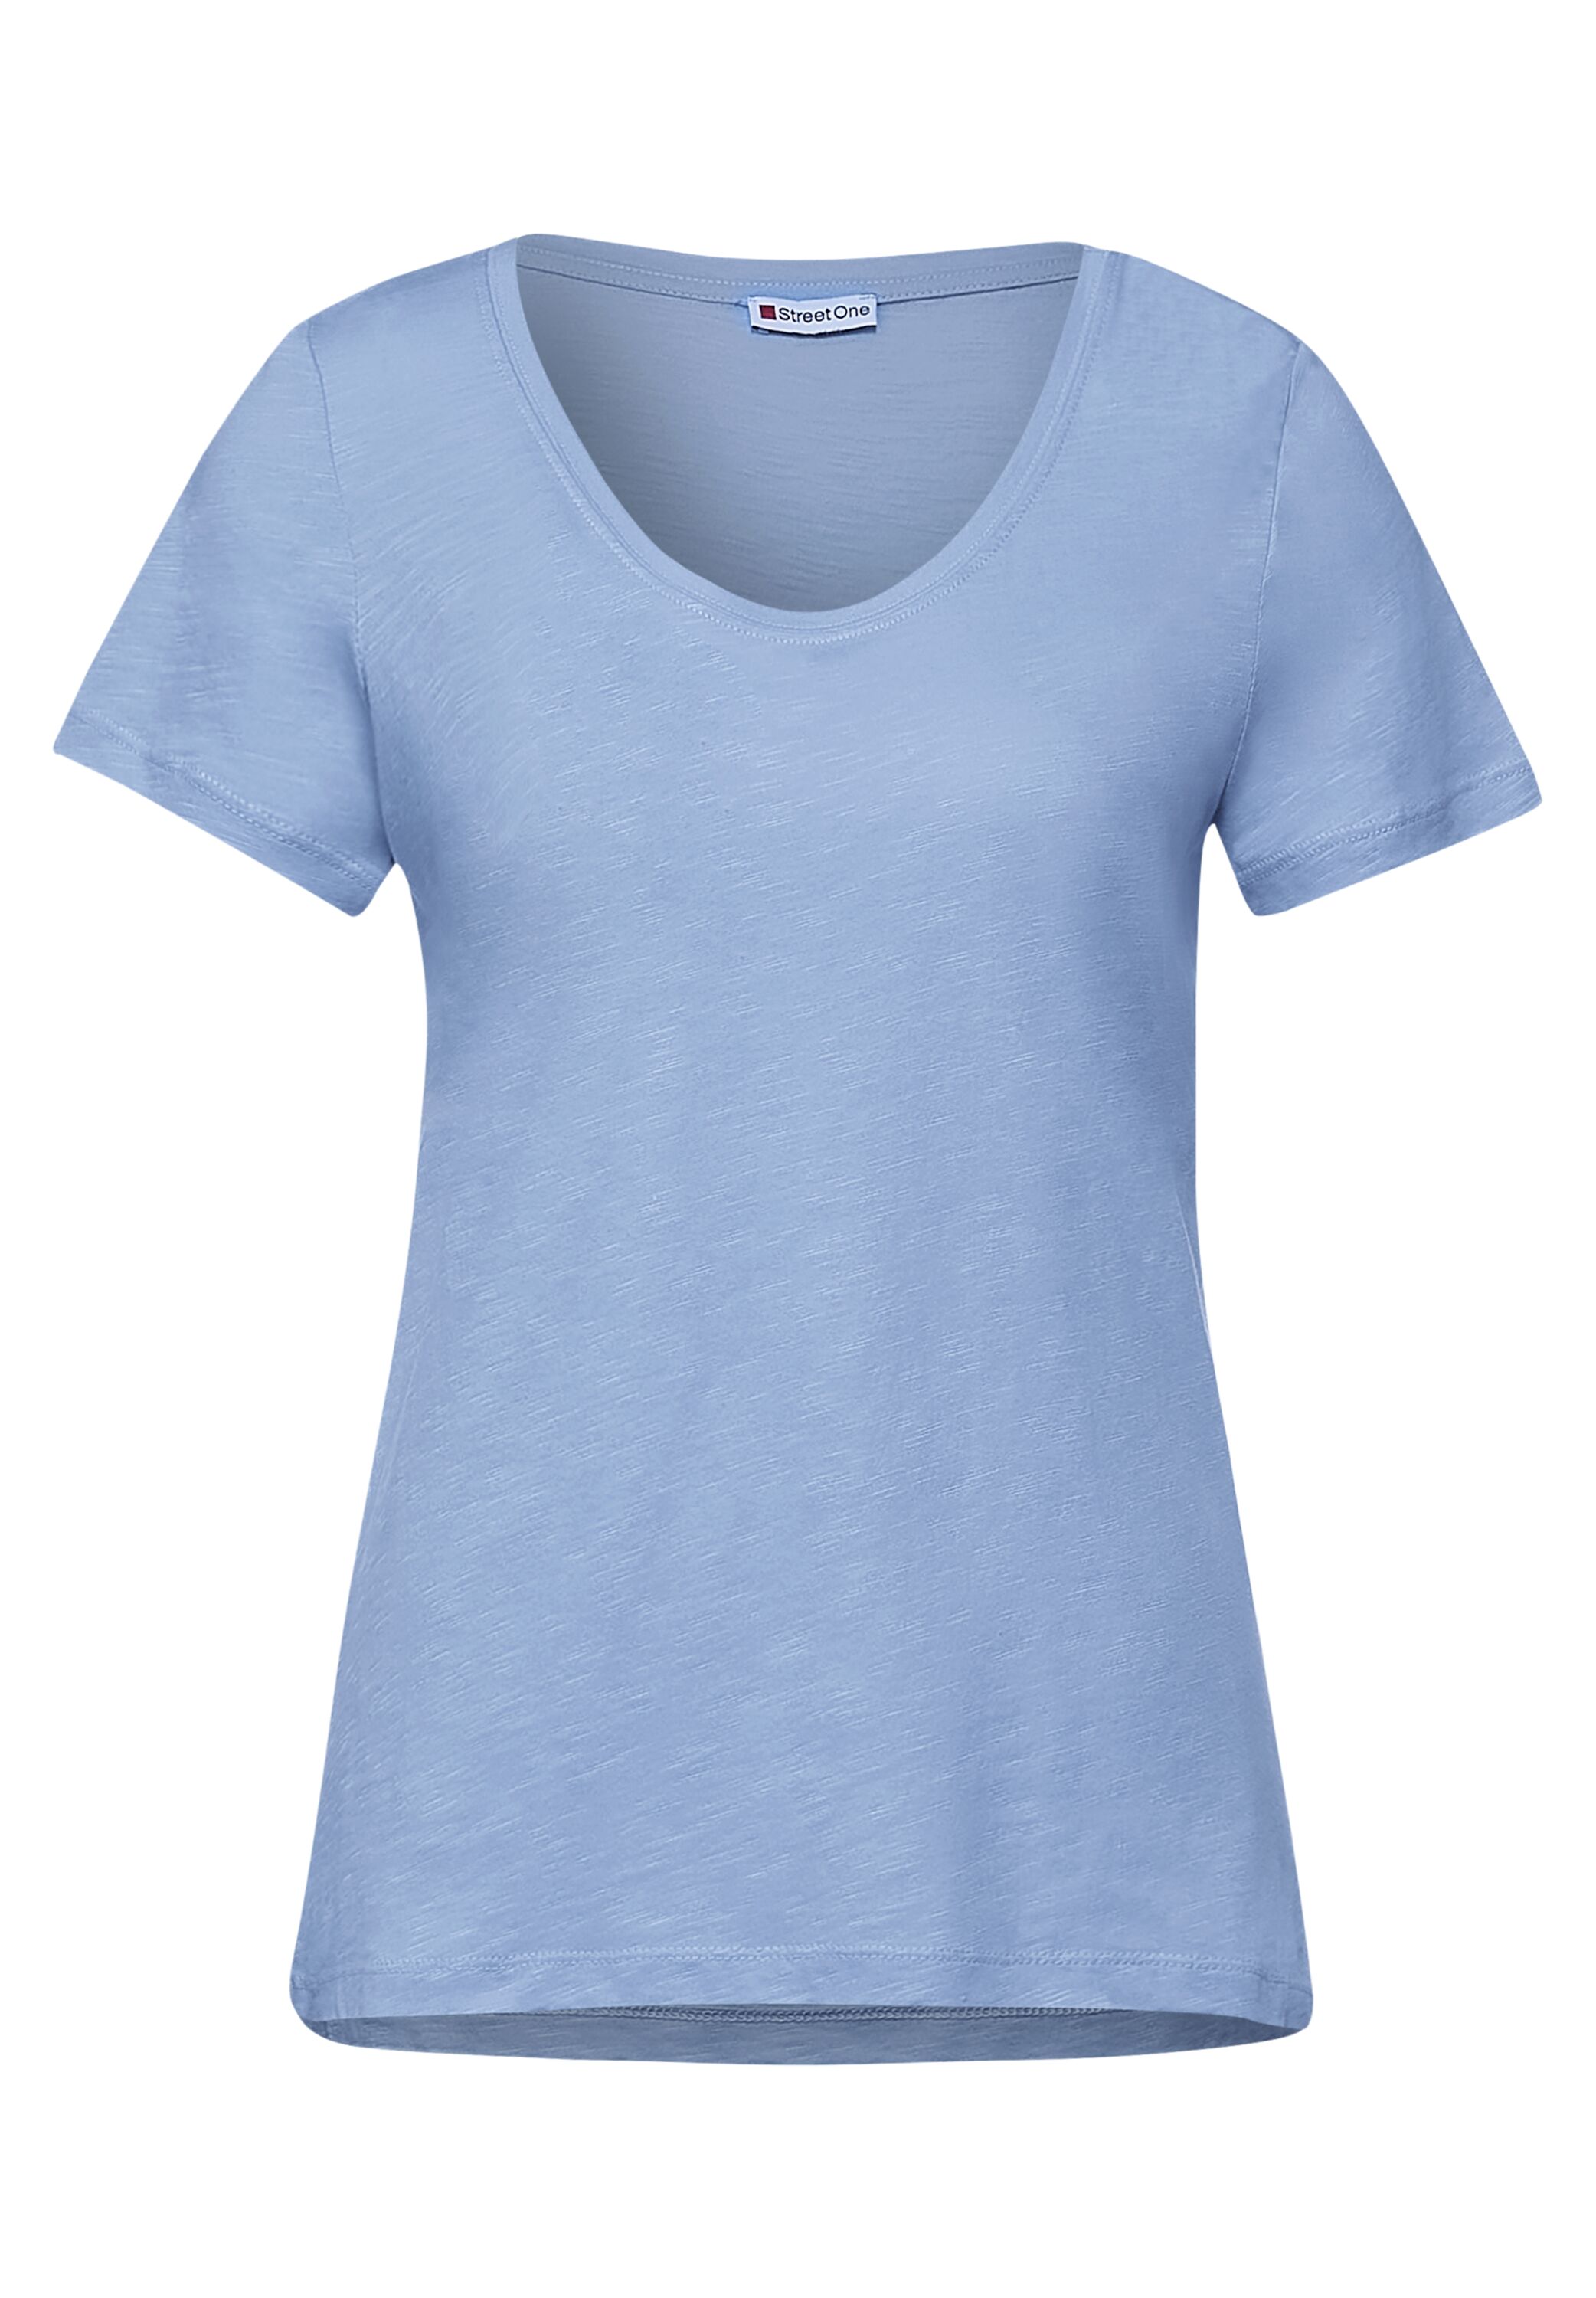 Street One Mid Blue Mode in A316300-13032 - Sunny CONCEPT T-Shirt Gerda